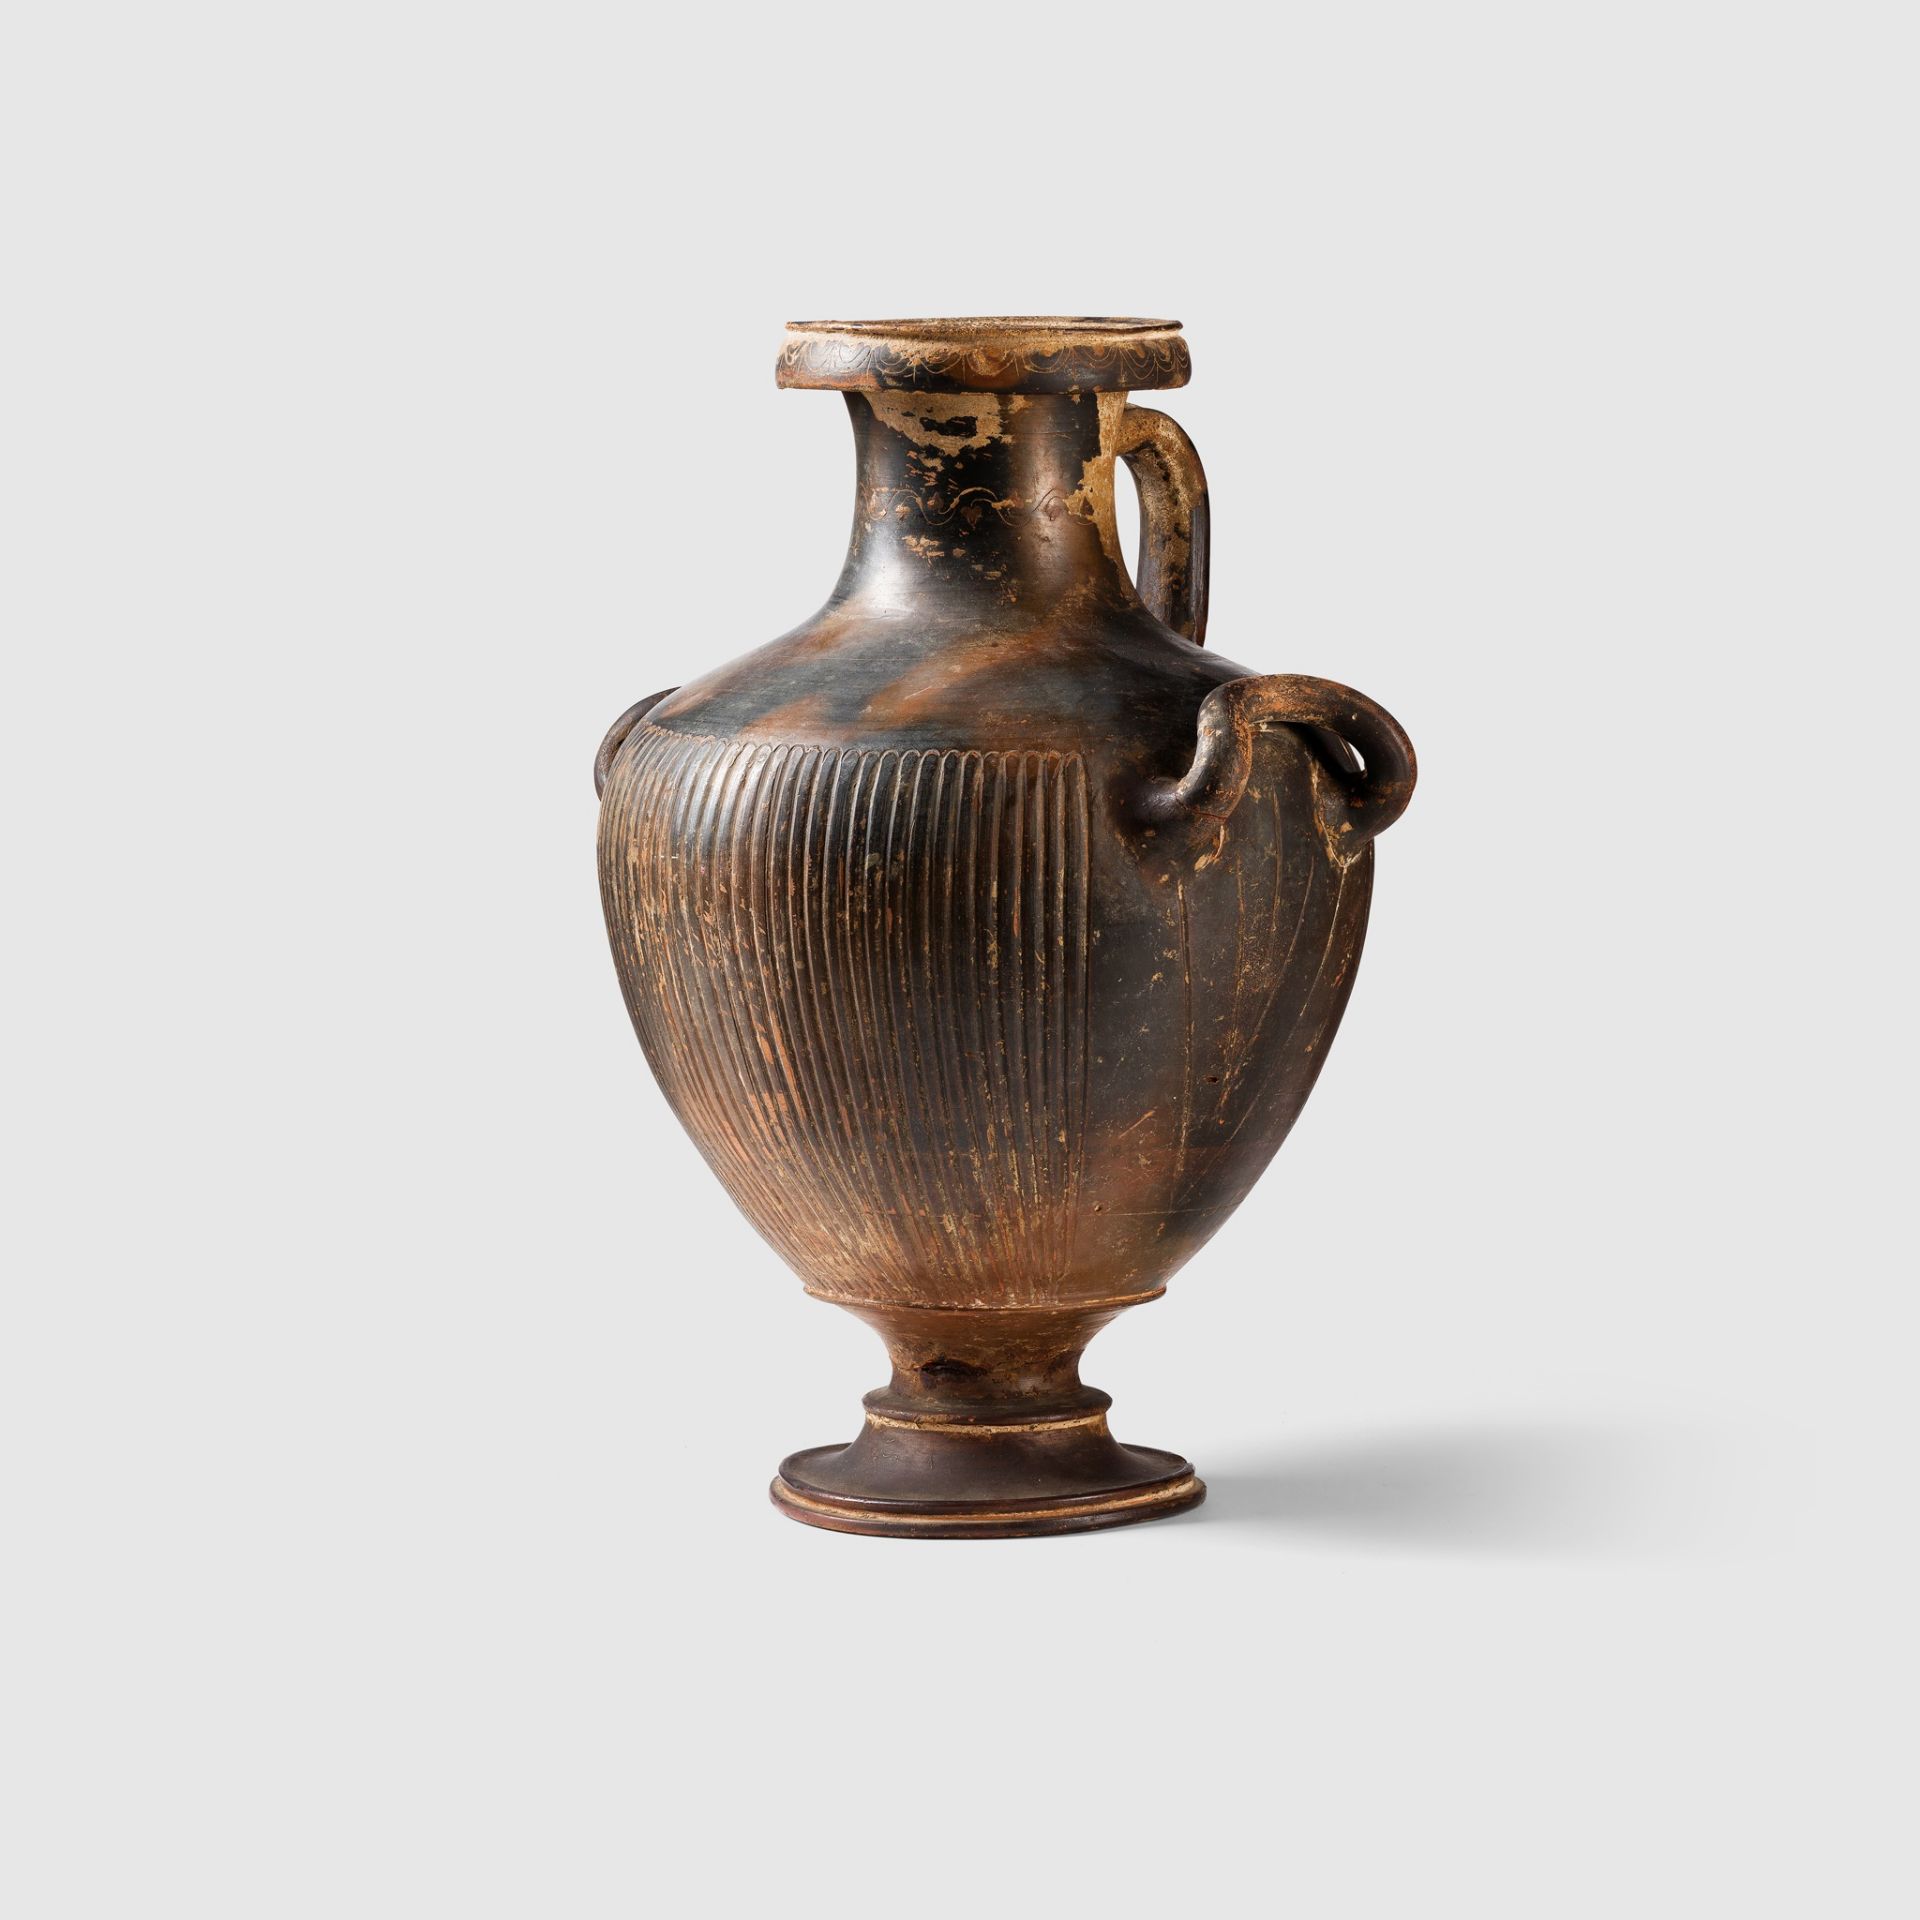 GNATHIAN WARE HYDRIA SOUTHERN ITALY, C. 3RD CENTURY B.C. - Image 2 of 4